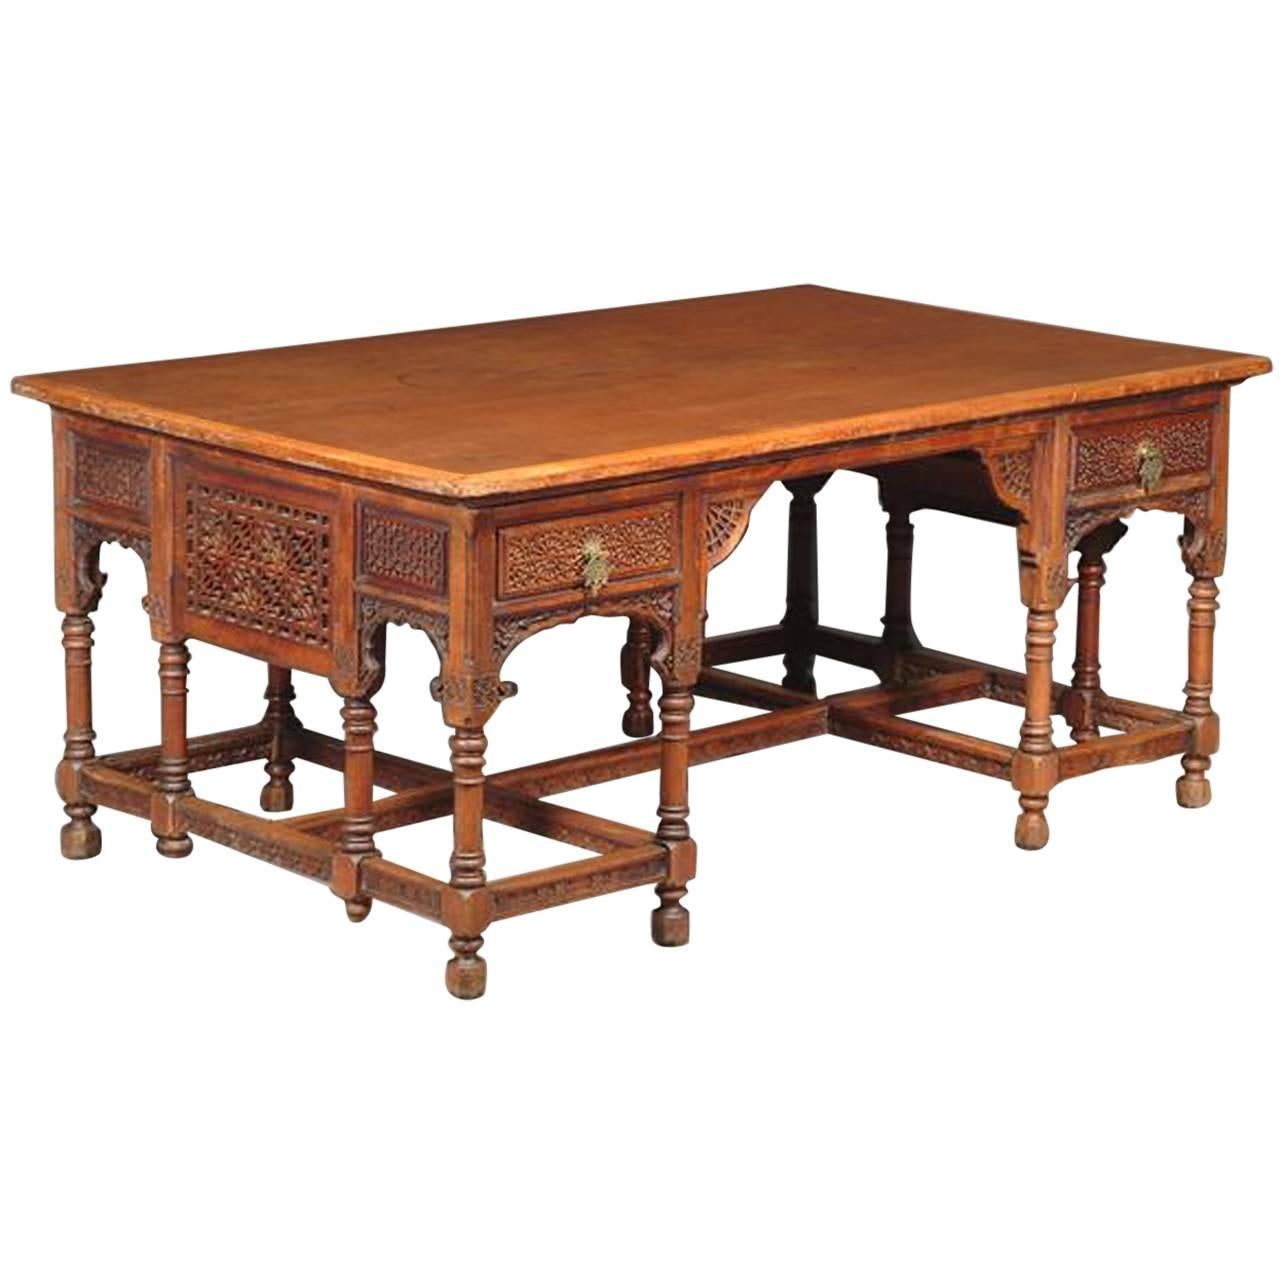 An Anglo-Moorish Walnut Partners' Desk, Attributed to Liberty and Co.